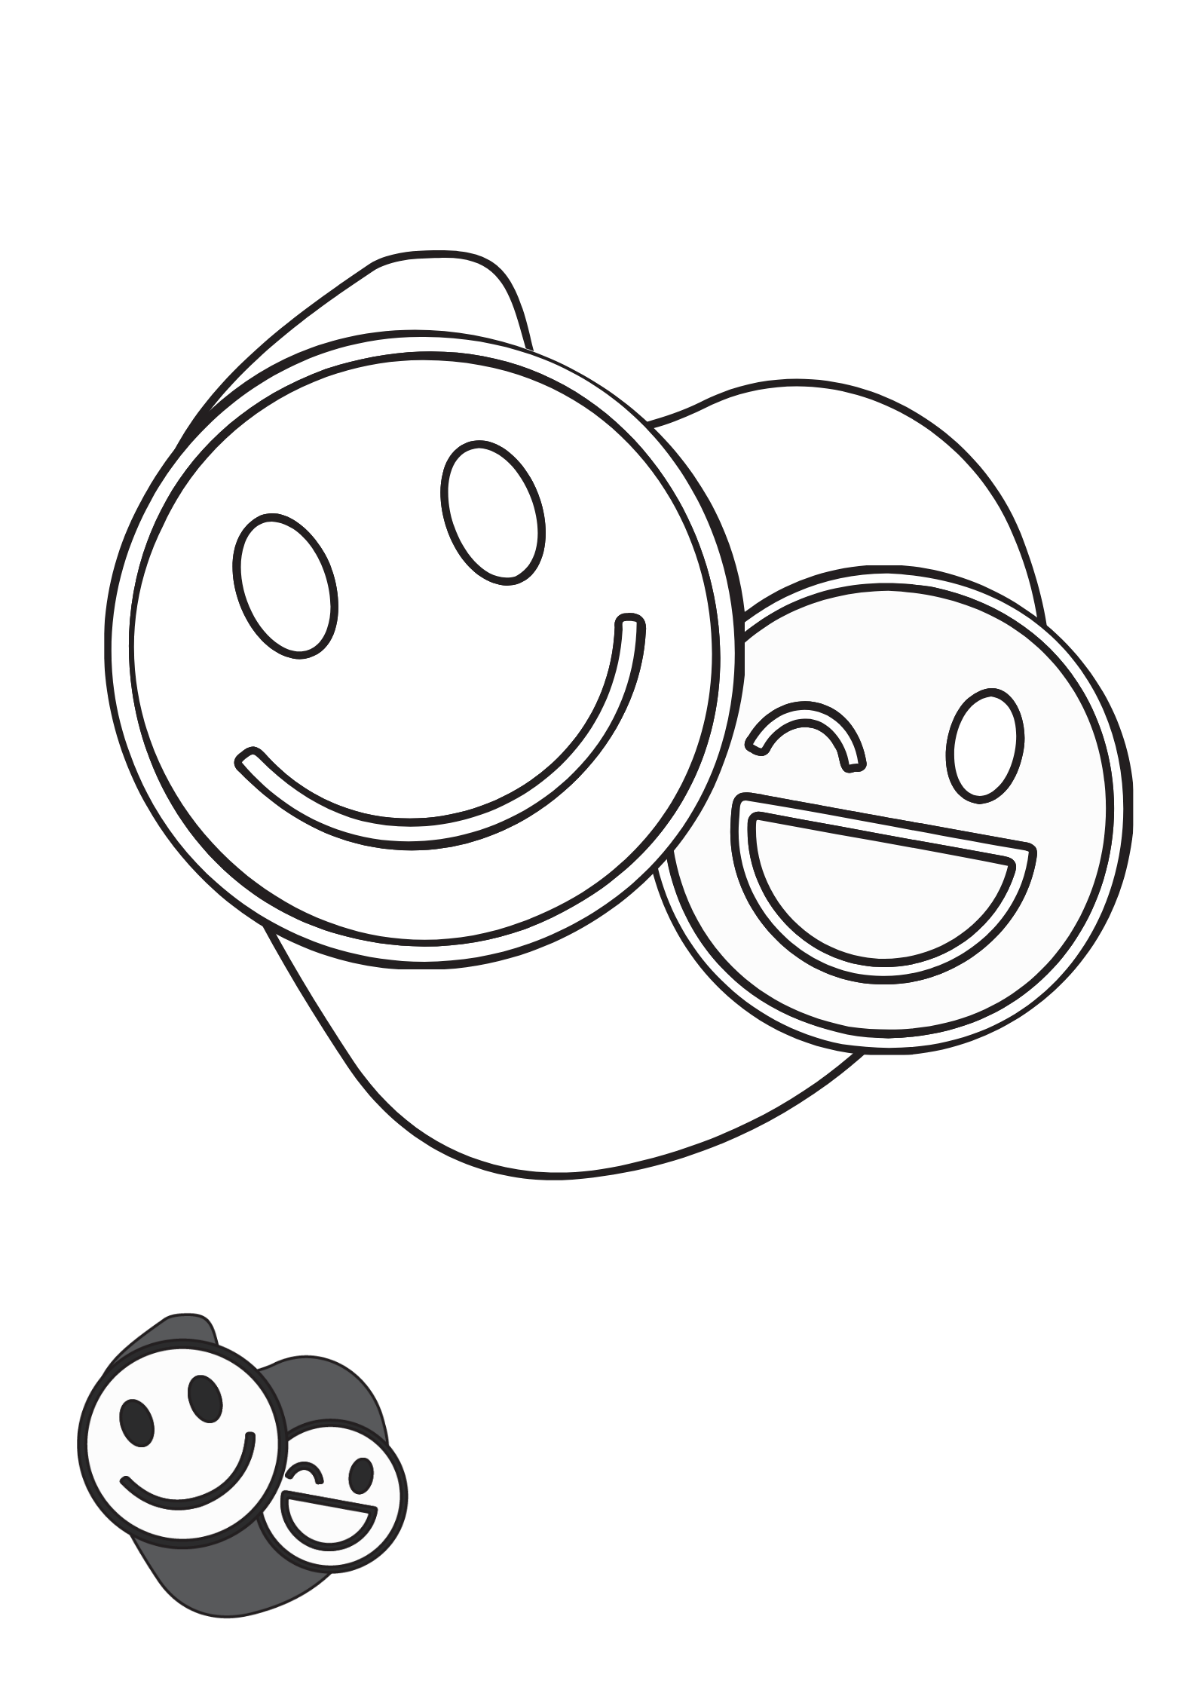 Free White Smiley coloring page Template